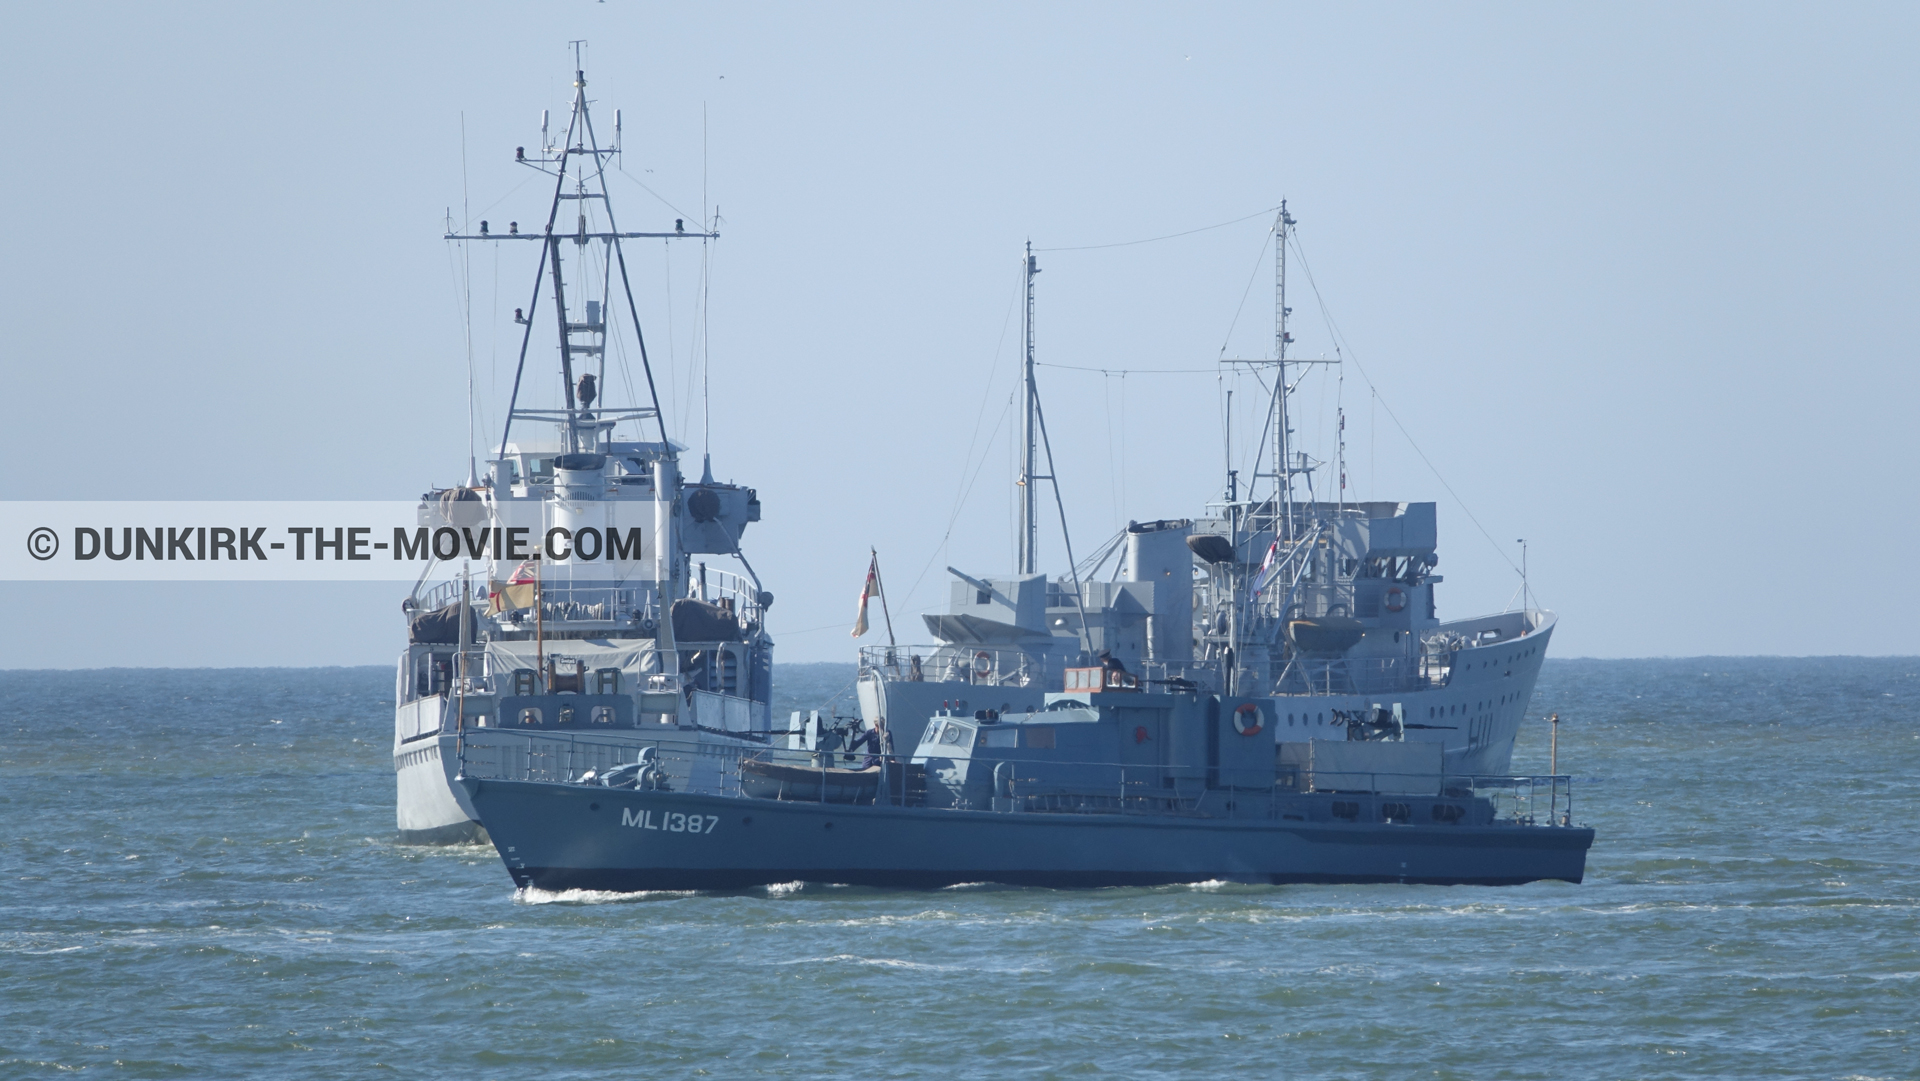 Picture with boat, blue sky, HMS Medusa - ML1387, calm sea,  from behind the scene of the Dunkirk movie by Nolan